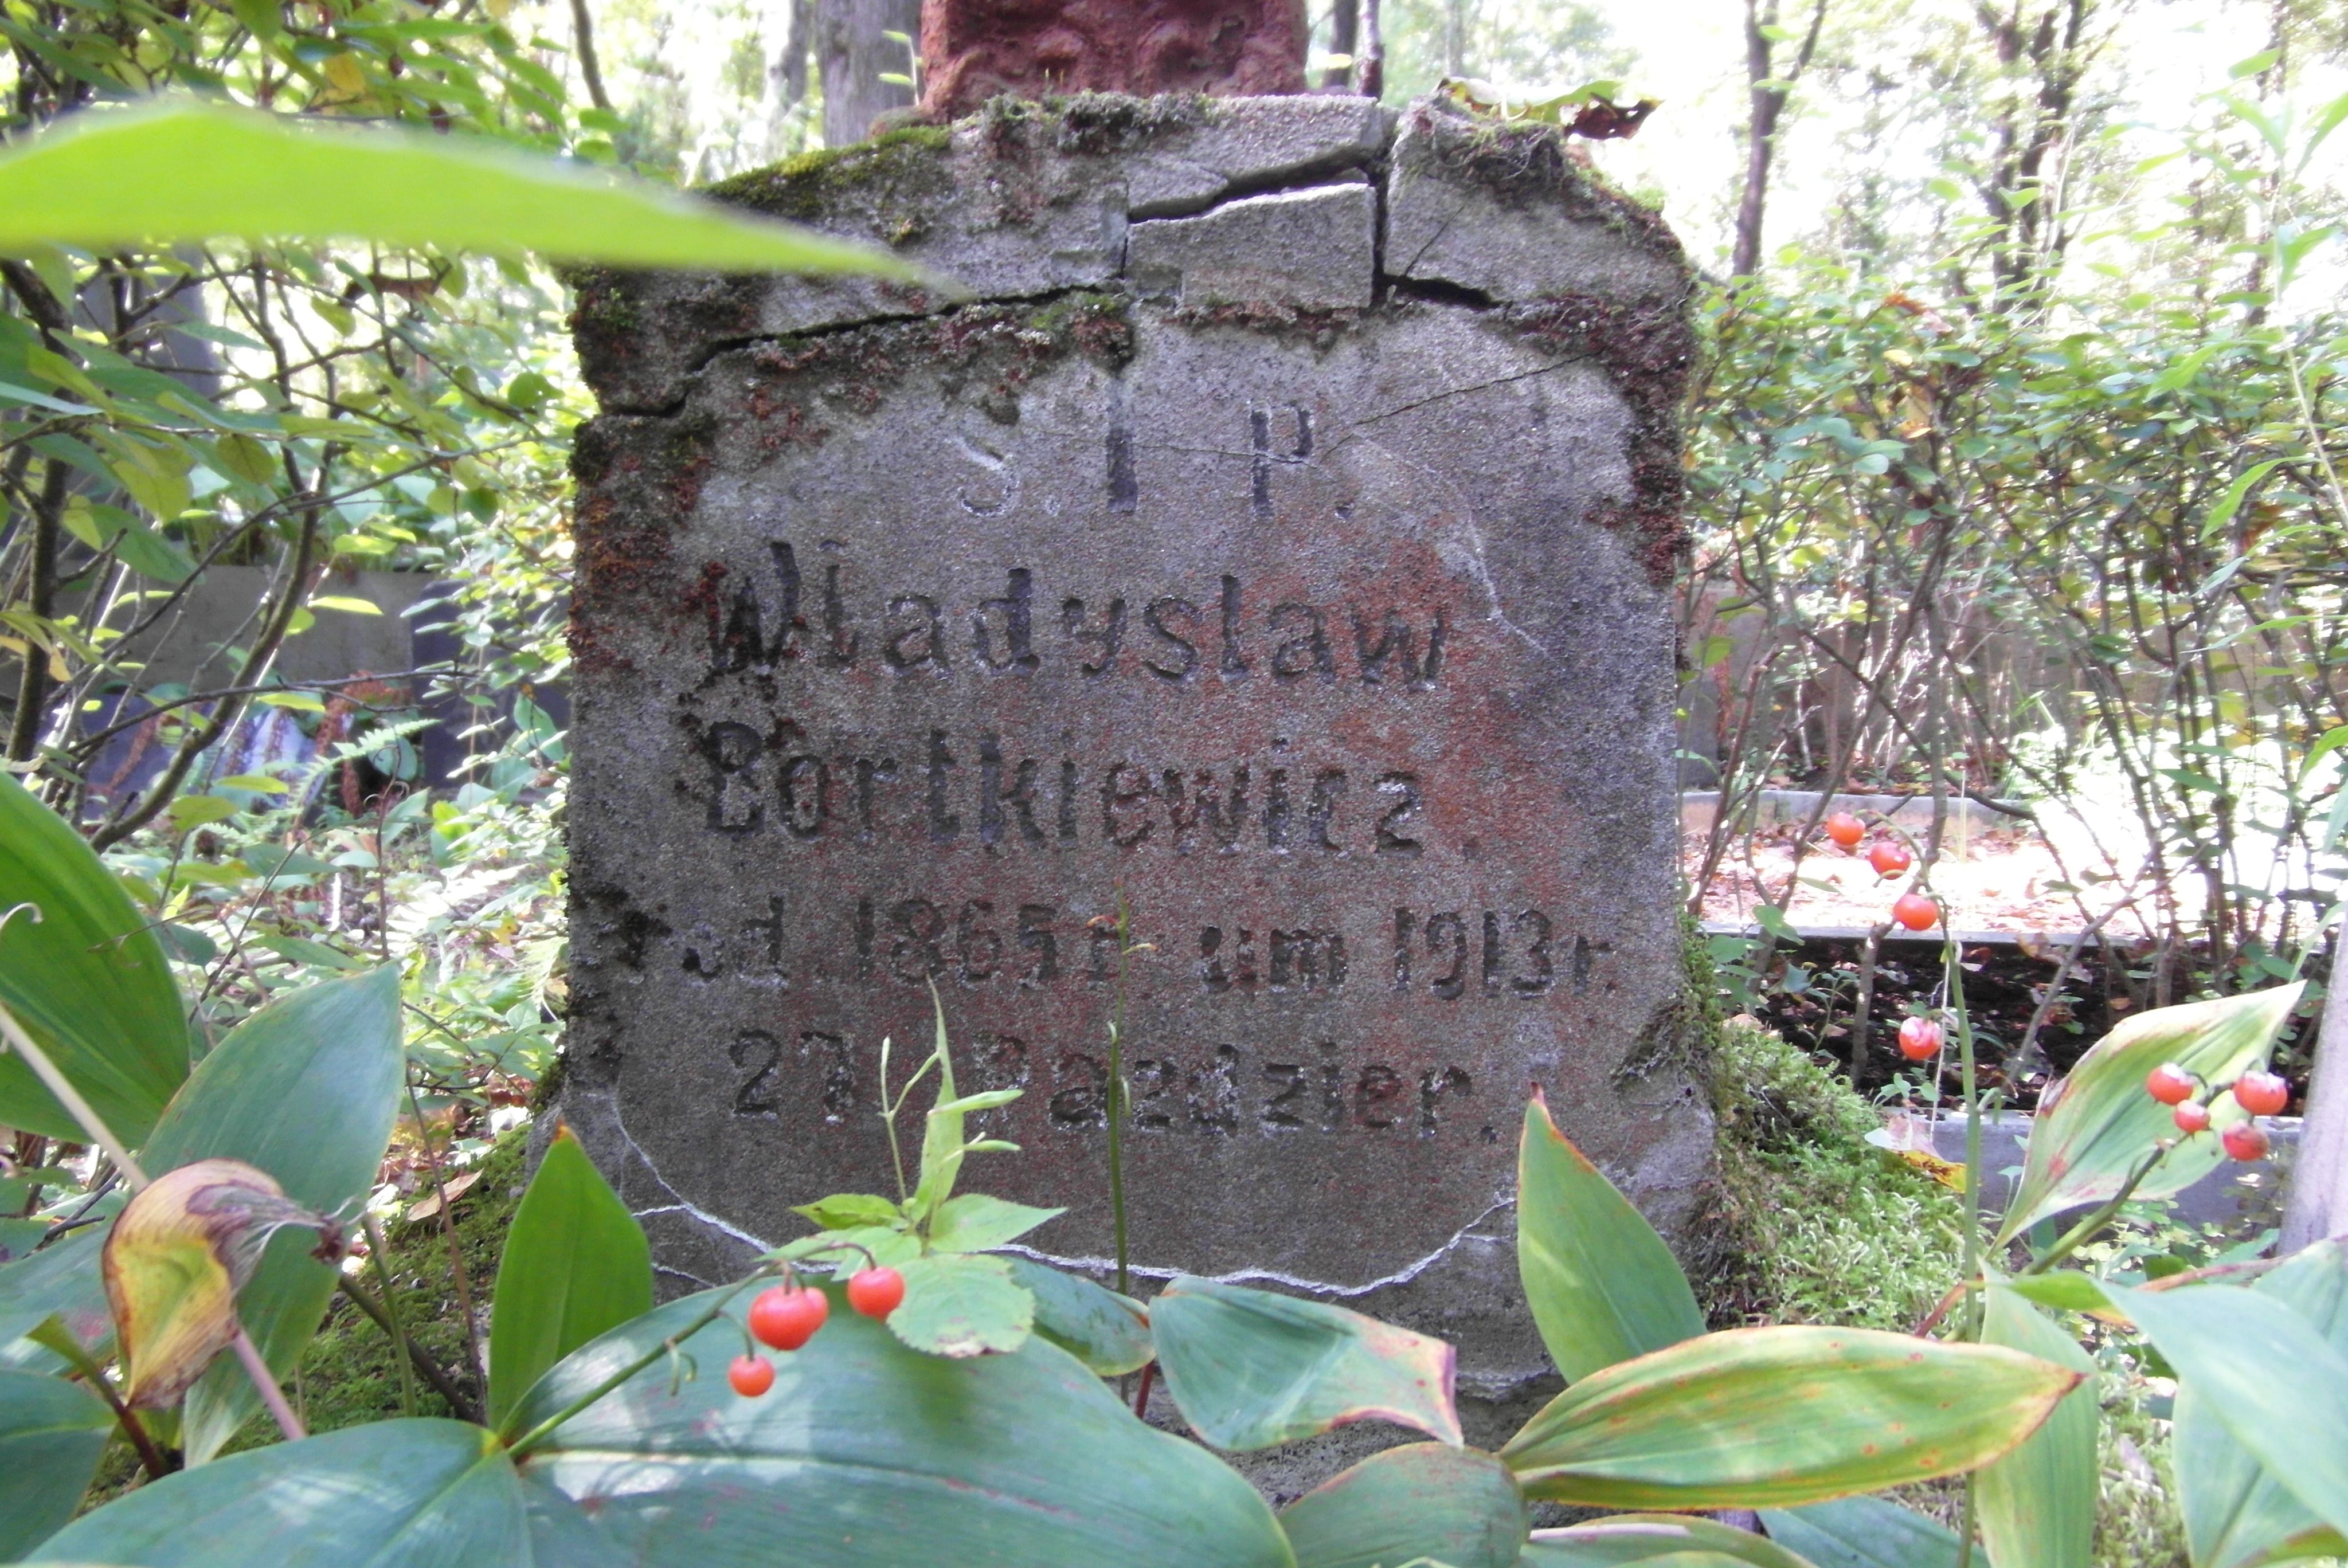 Inscription from the tombstone of Wladyslaw Bortkiewicz, St Michael's cemetery in Riga, as of 2021.